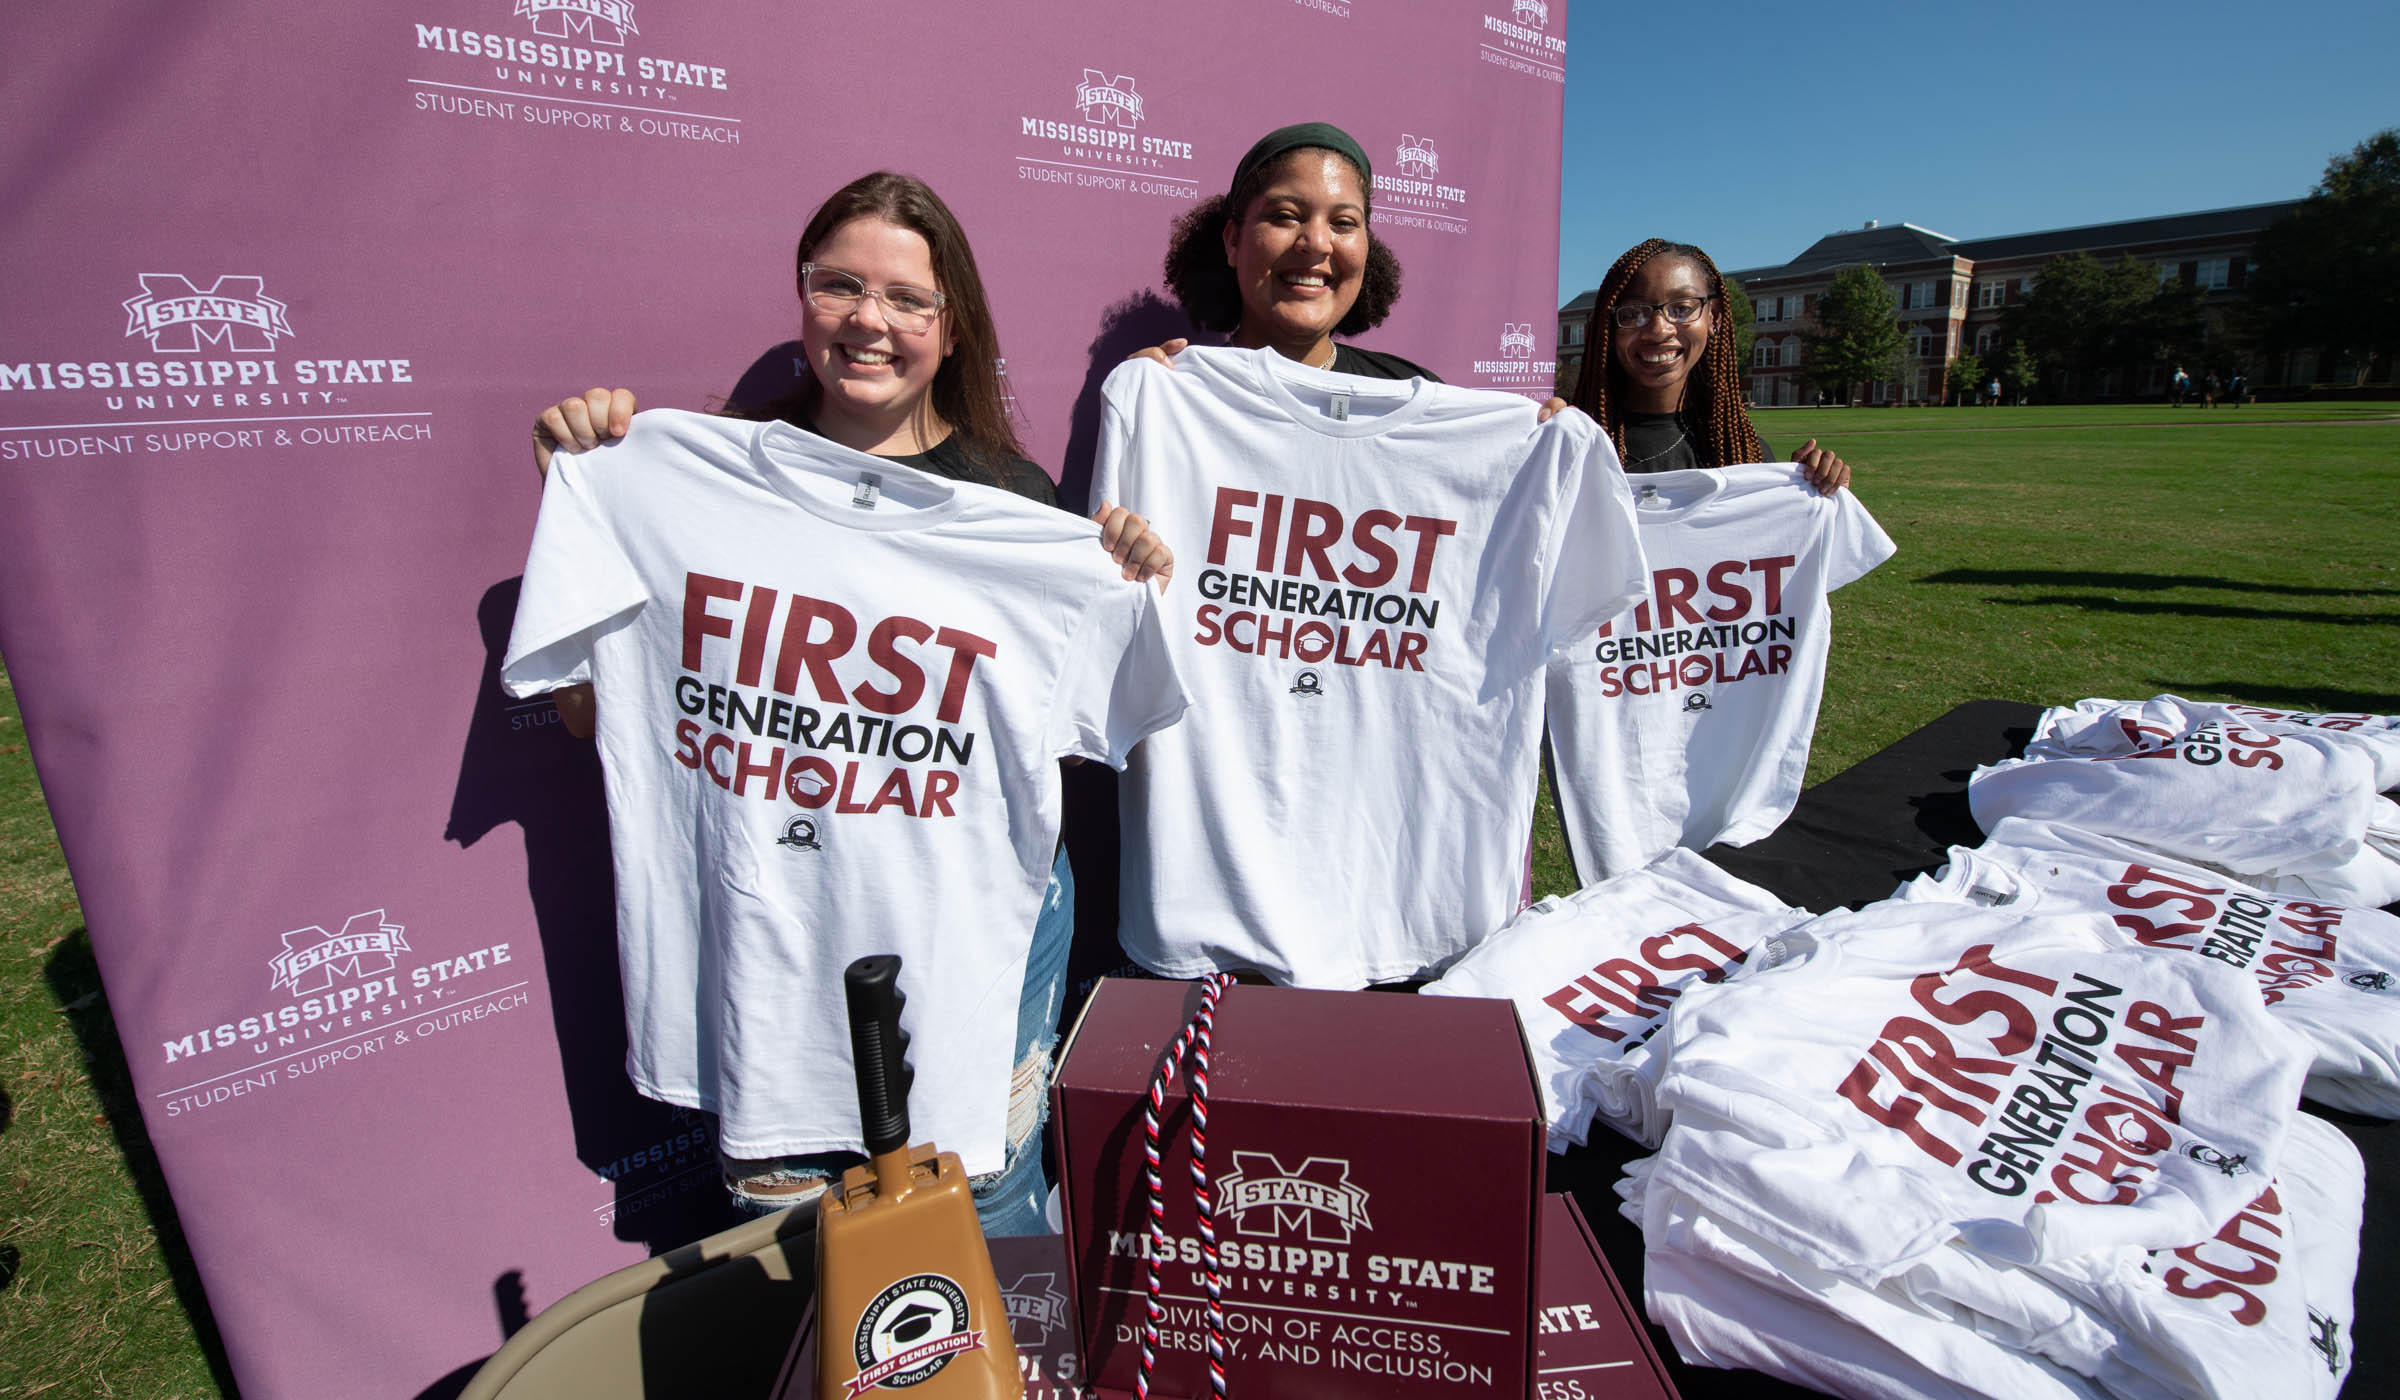 Three students hold up First Generation Scholar t-shirts at their Drill Field table.